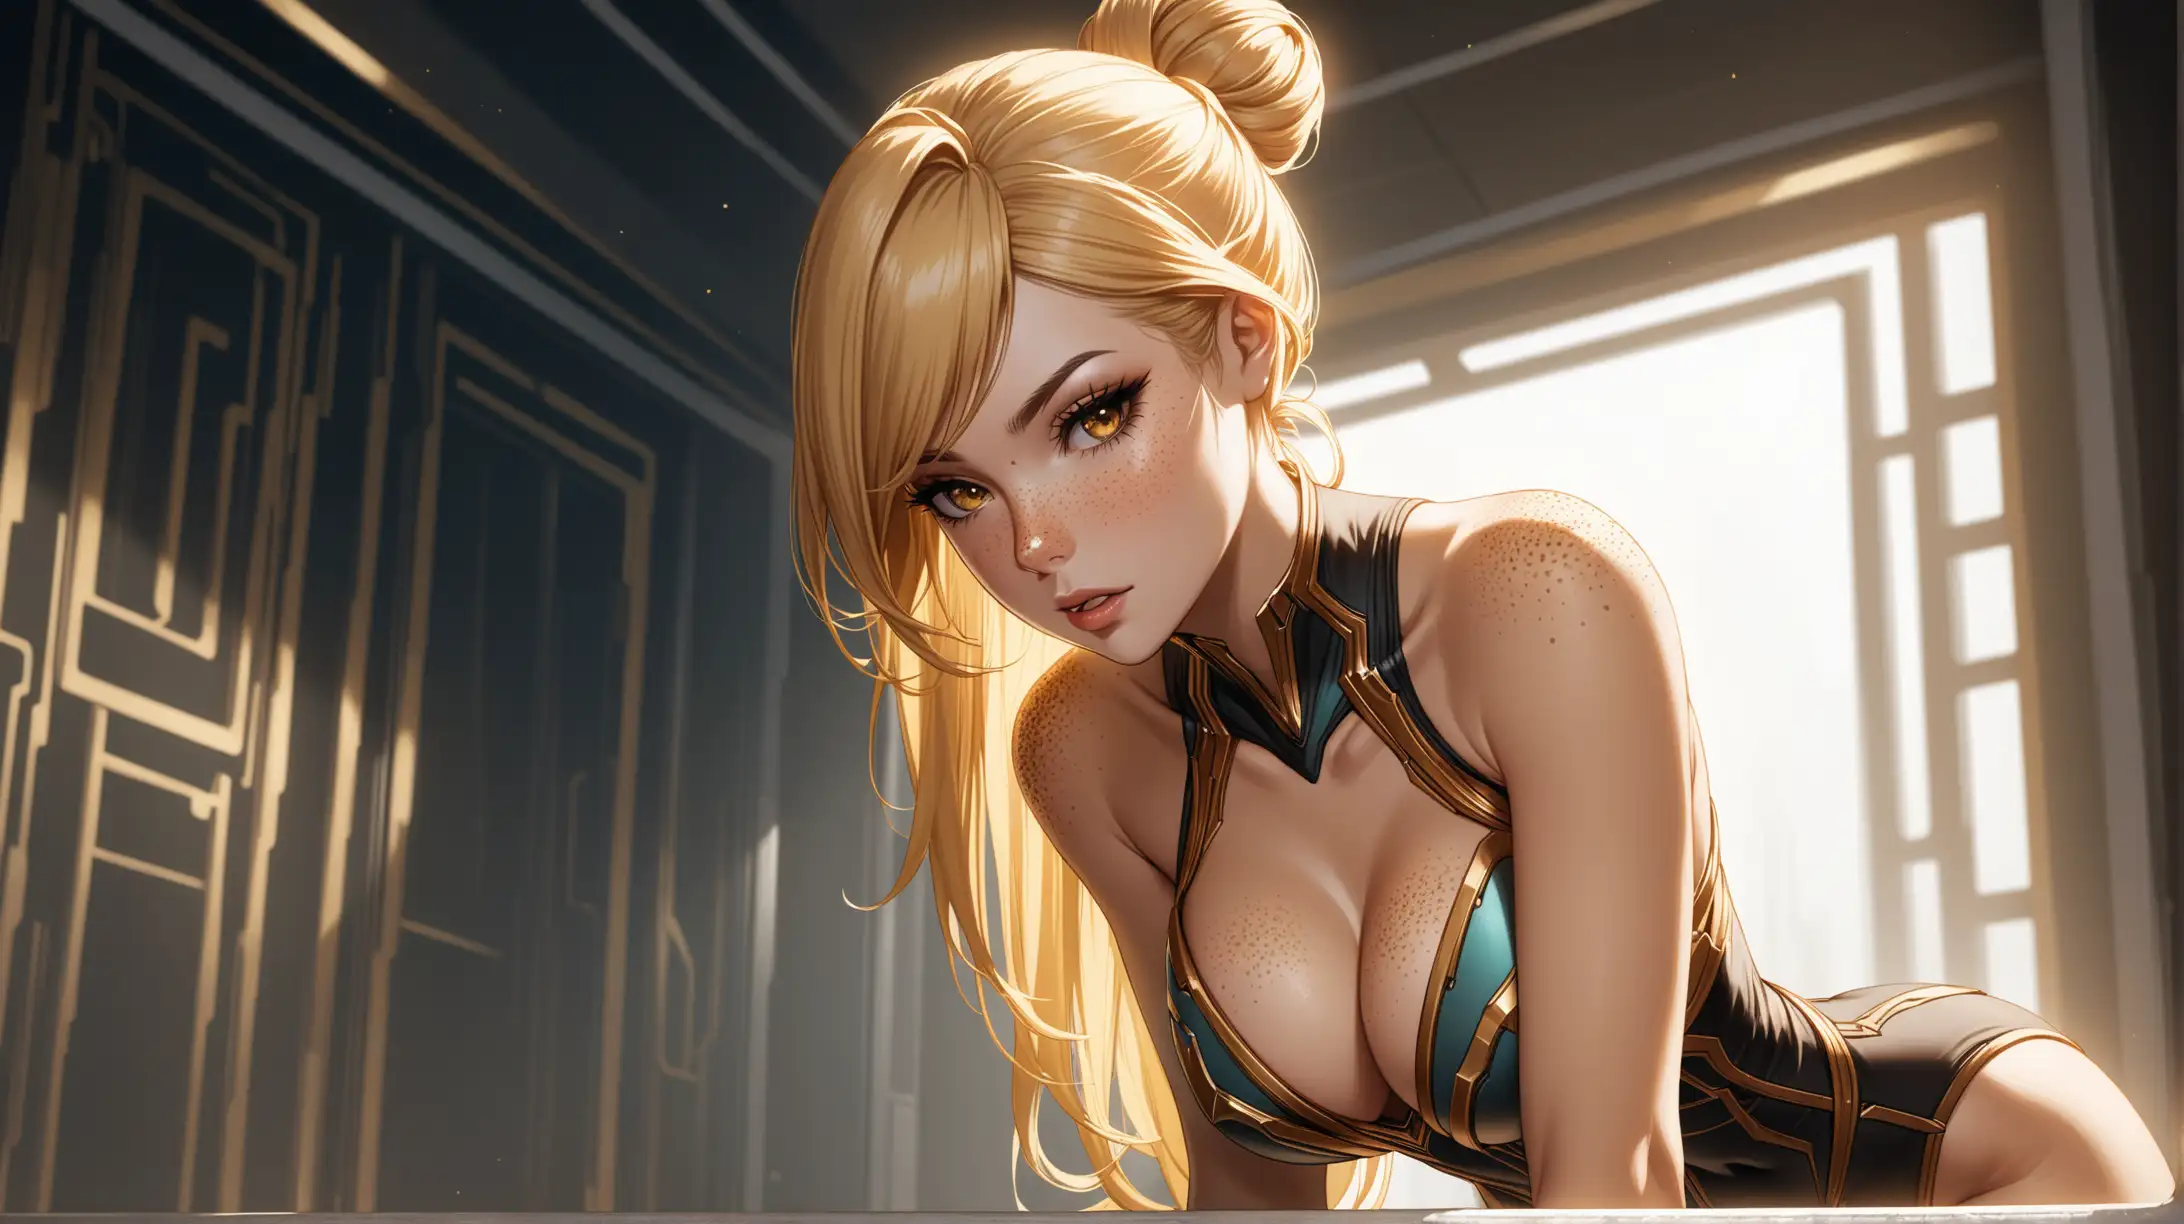 Draw a woman, long blonde hair in a bun, gold eyes, freckles, perky figure, outfit inspired from the game Warframe, high quality, leaning forward, indoors, seductive, cleavage, natural lighting, adoring gaze